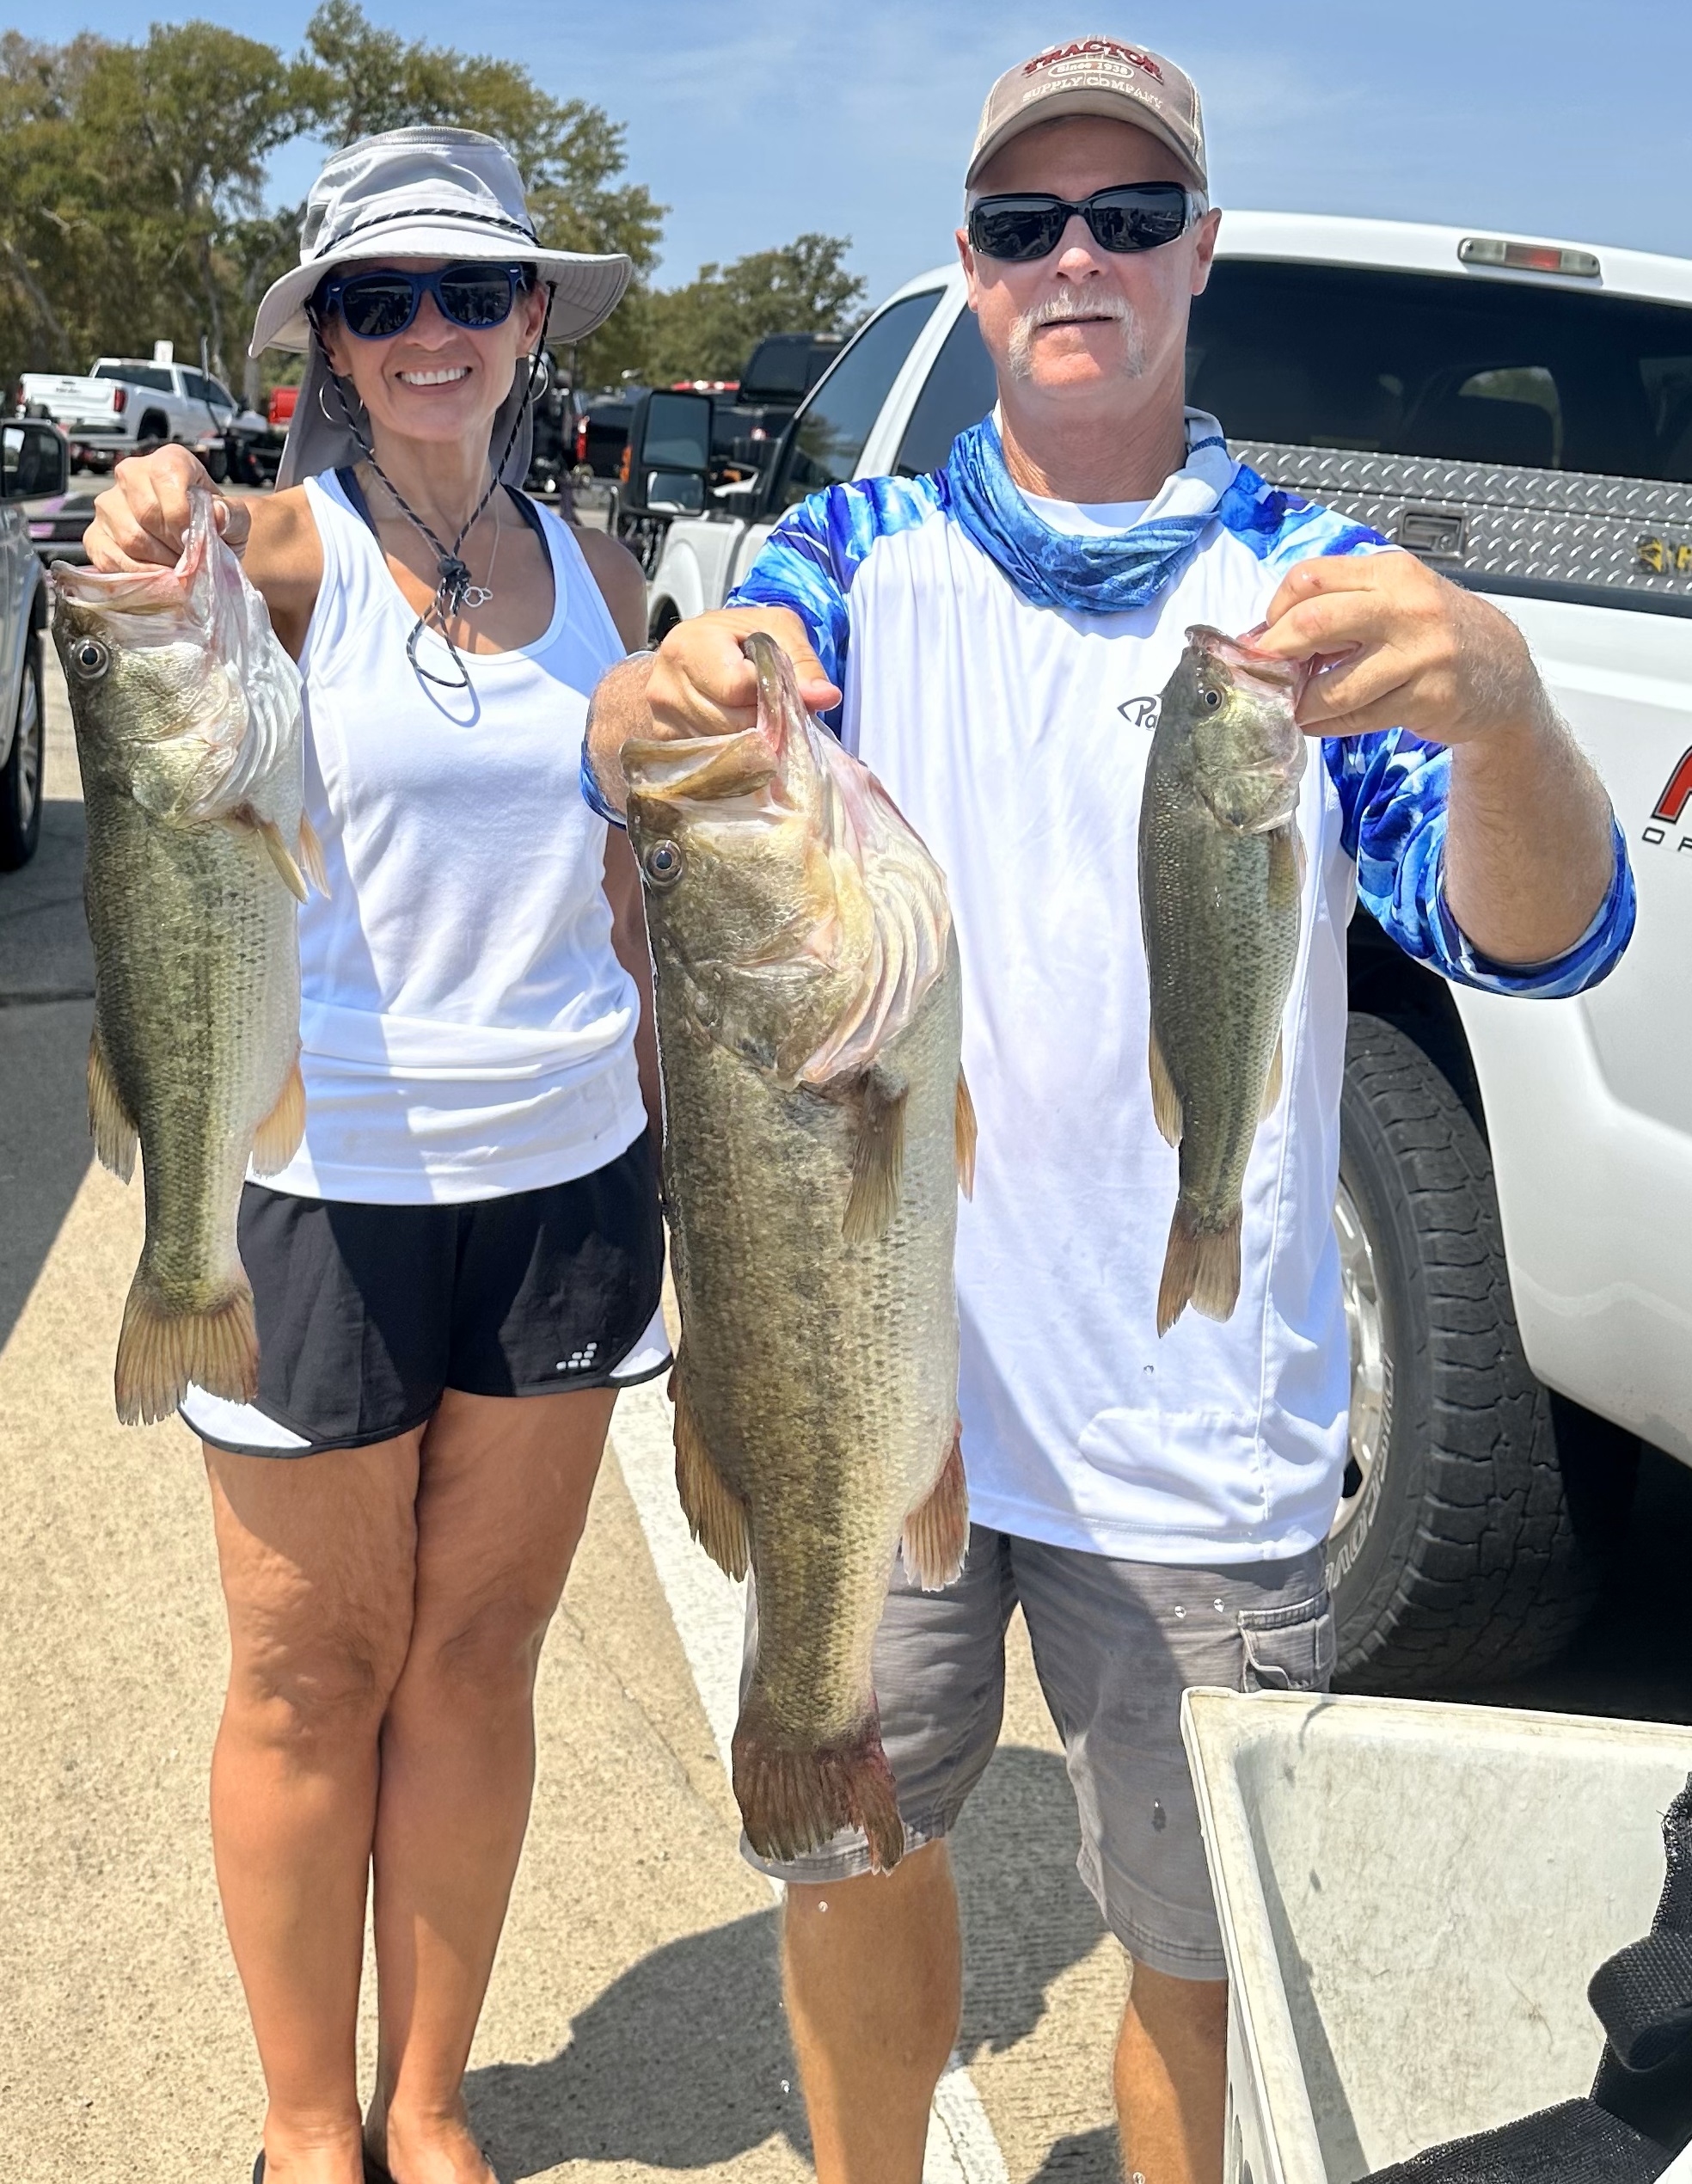 Michele Derryberry and Todd Staton took 1st place on Lake Grapevine with 11.51 lbs including Big Bass of 7.35 lbs!!